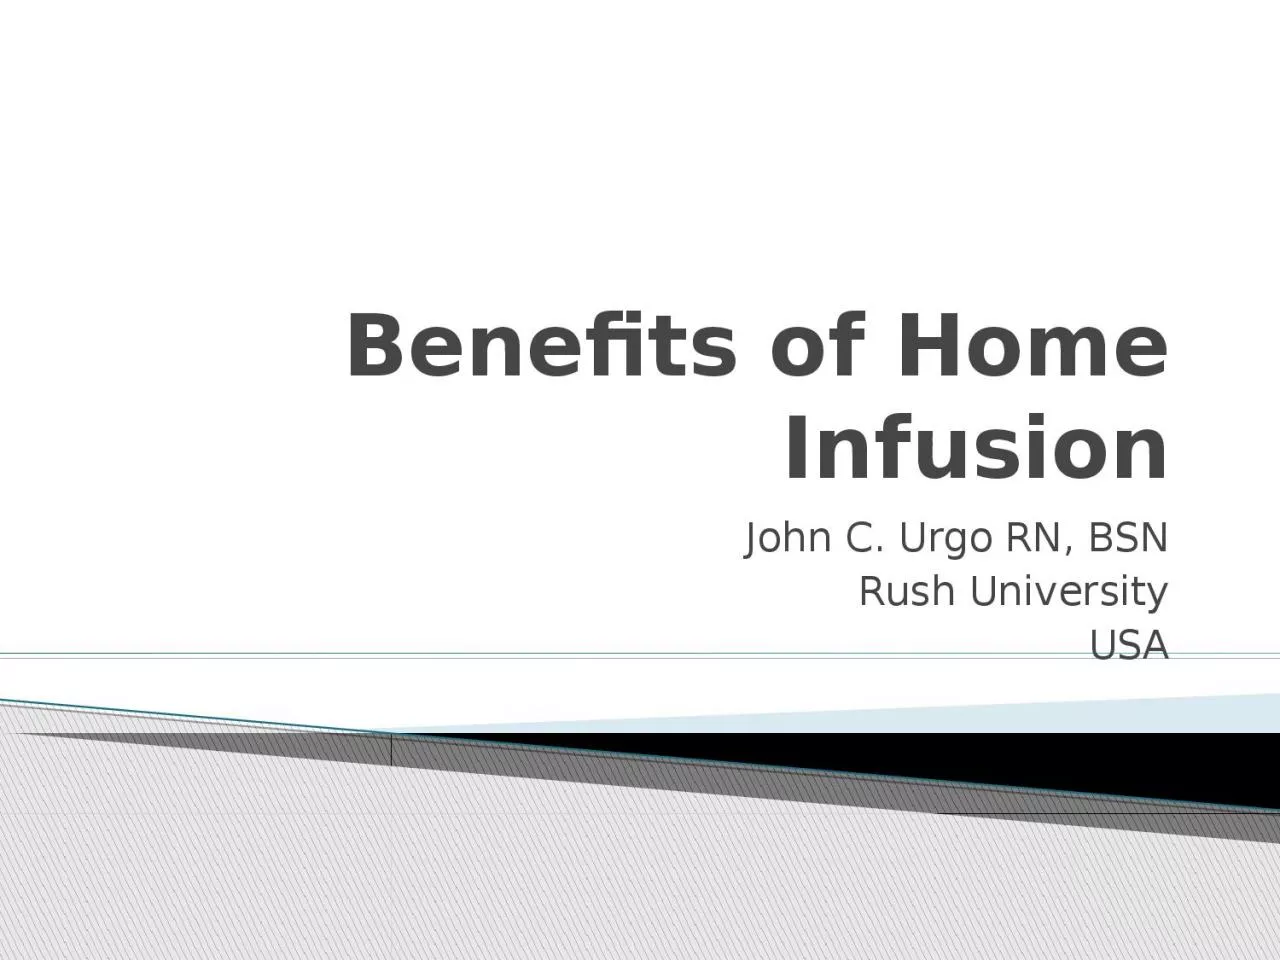 Benefits of Home Infusion